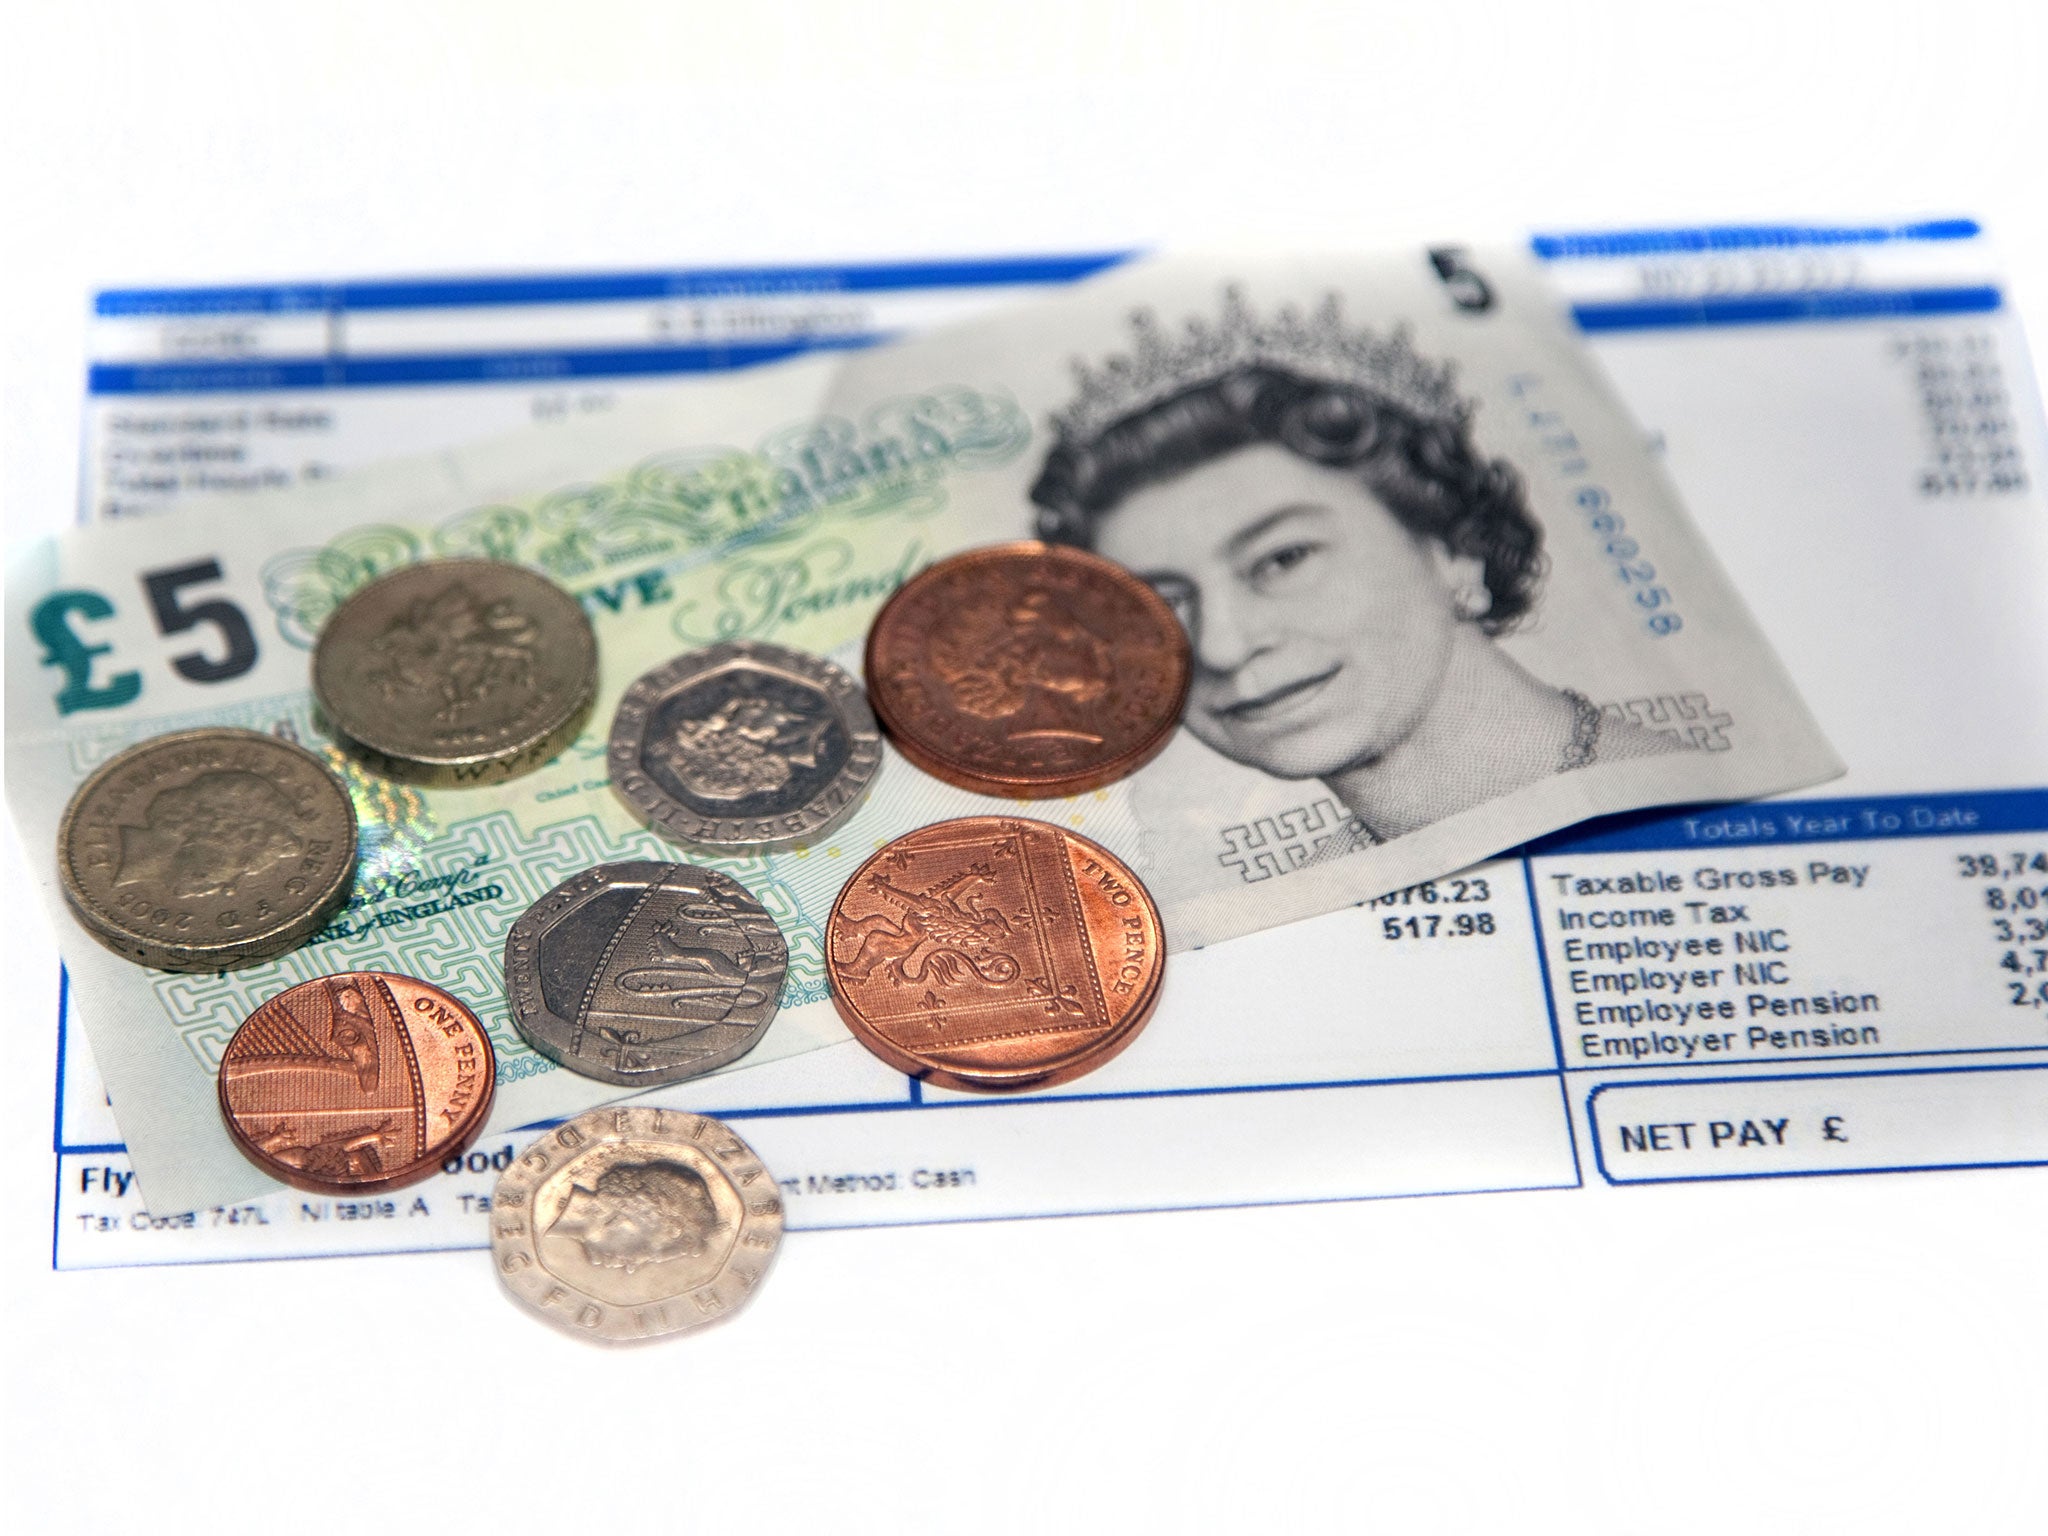 UK Living Wage is £7.65 per hour in November 2013